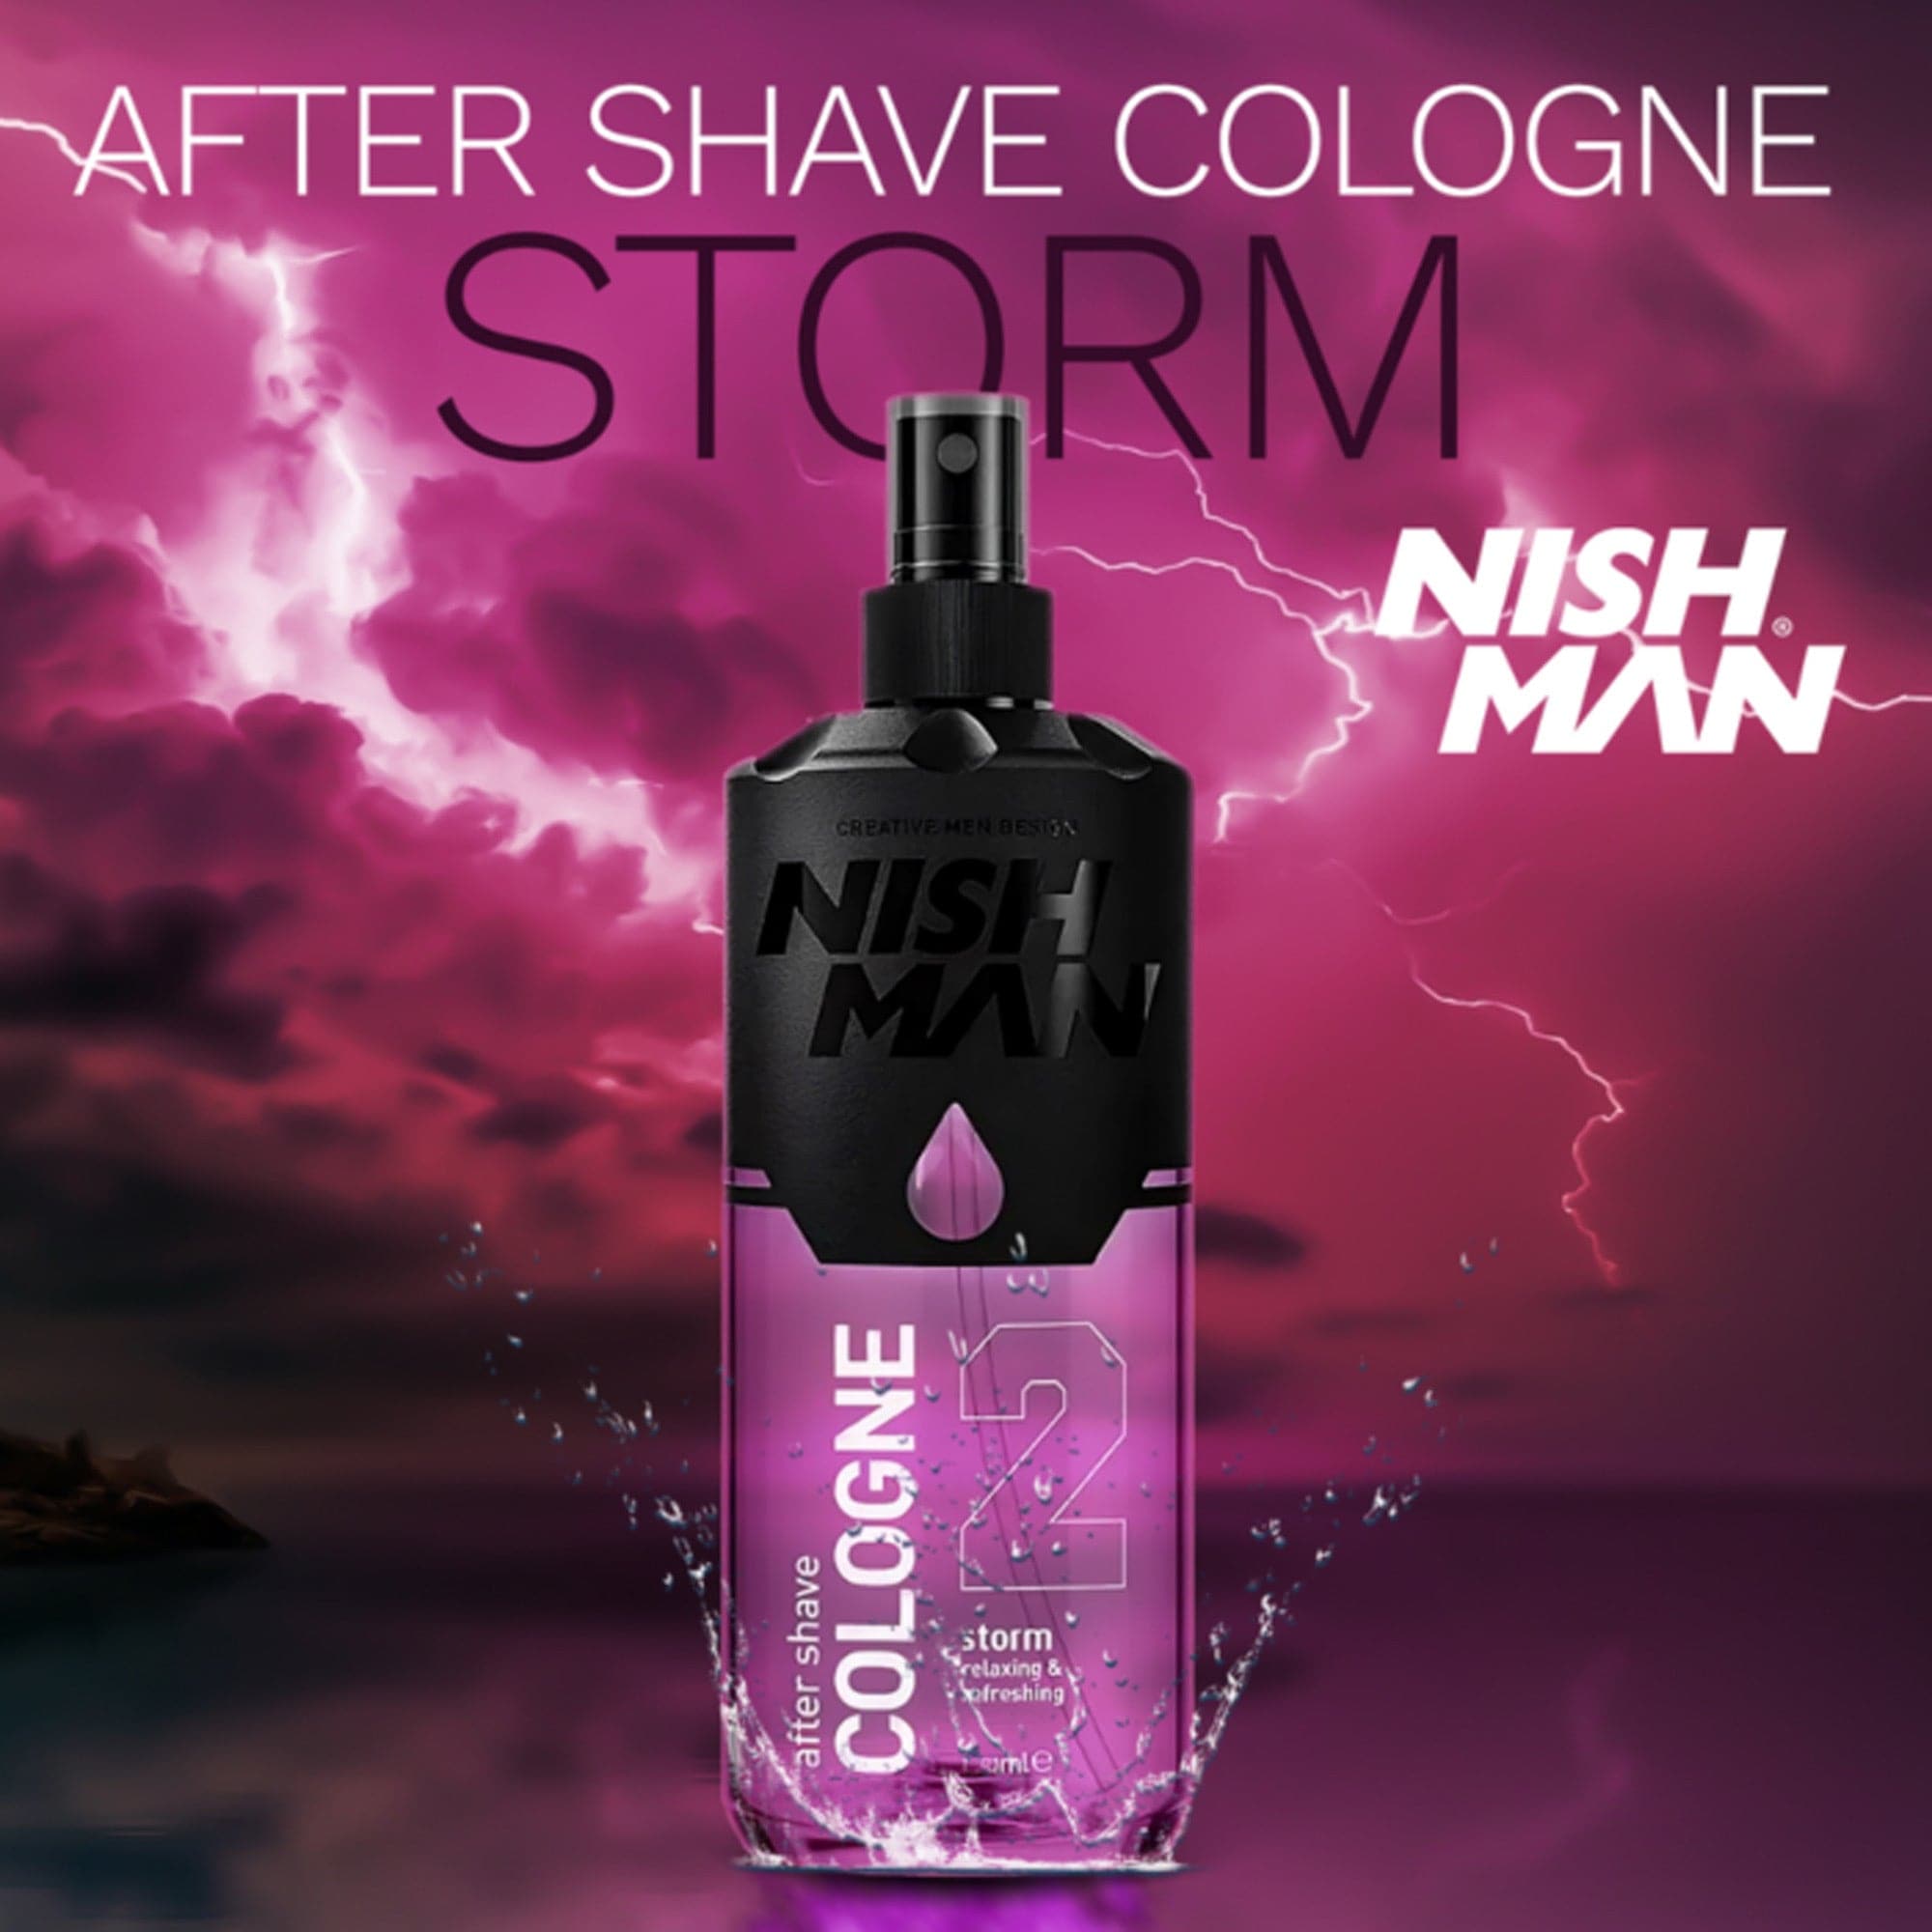 Nishman - After Shave Cologne No.2 Storm 150ml